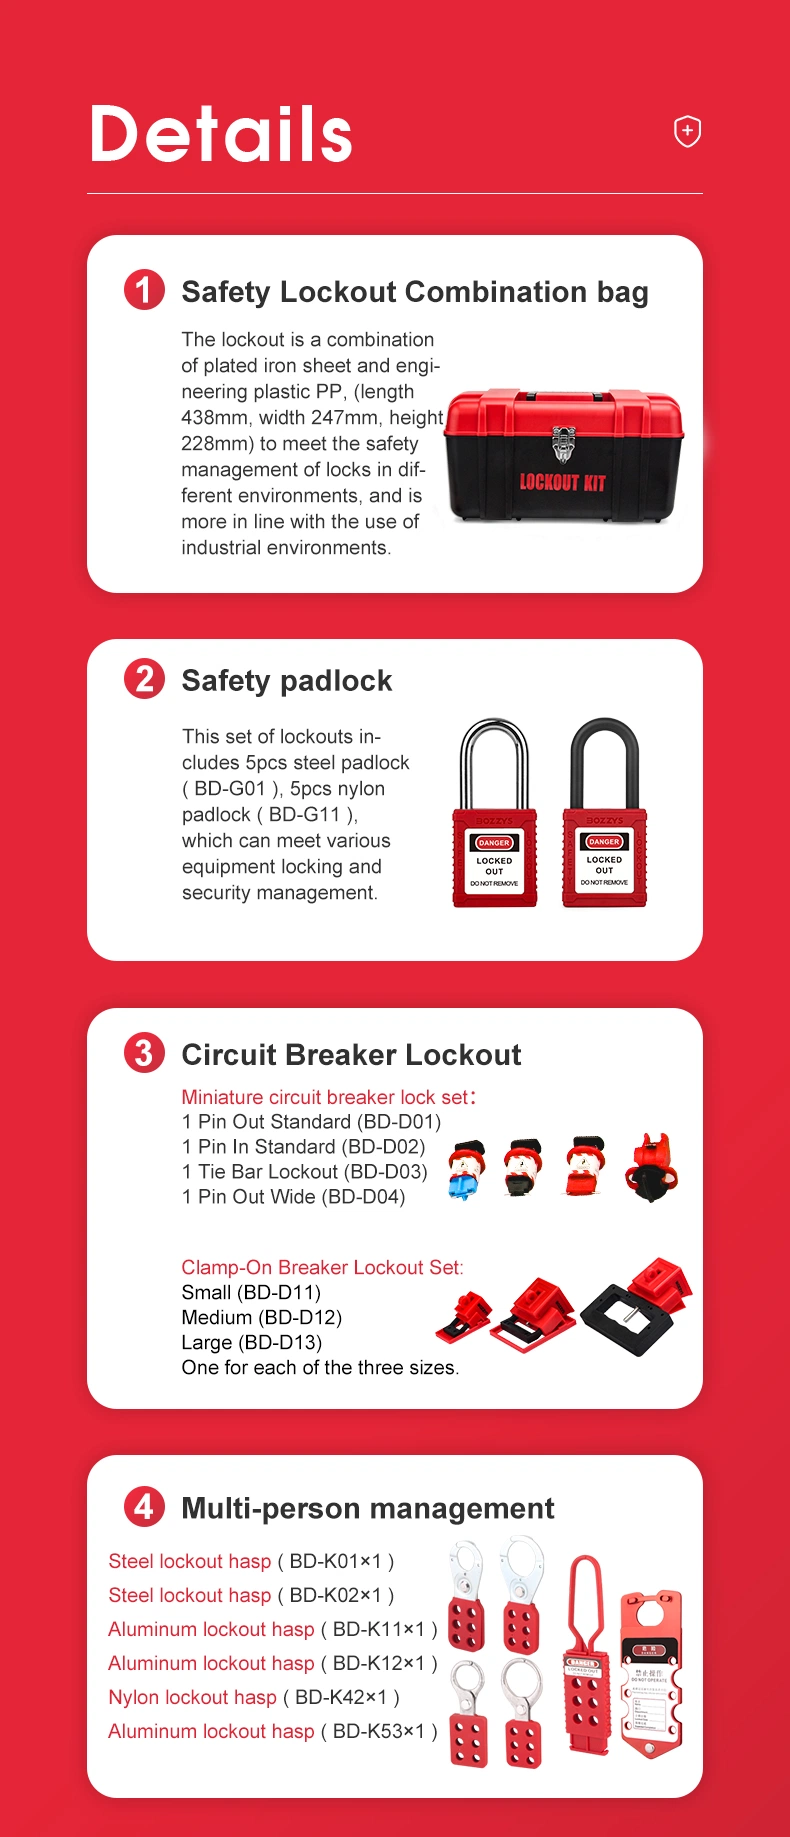 Valve and Electrical Lockout Tagout Kit for Overhaul of Industrial Equipment